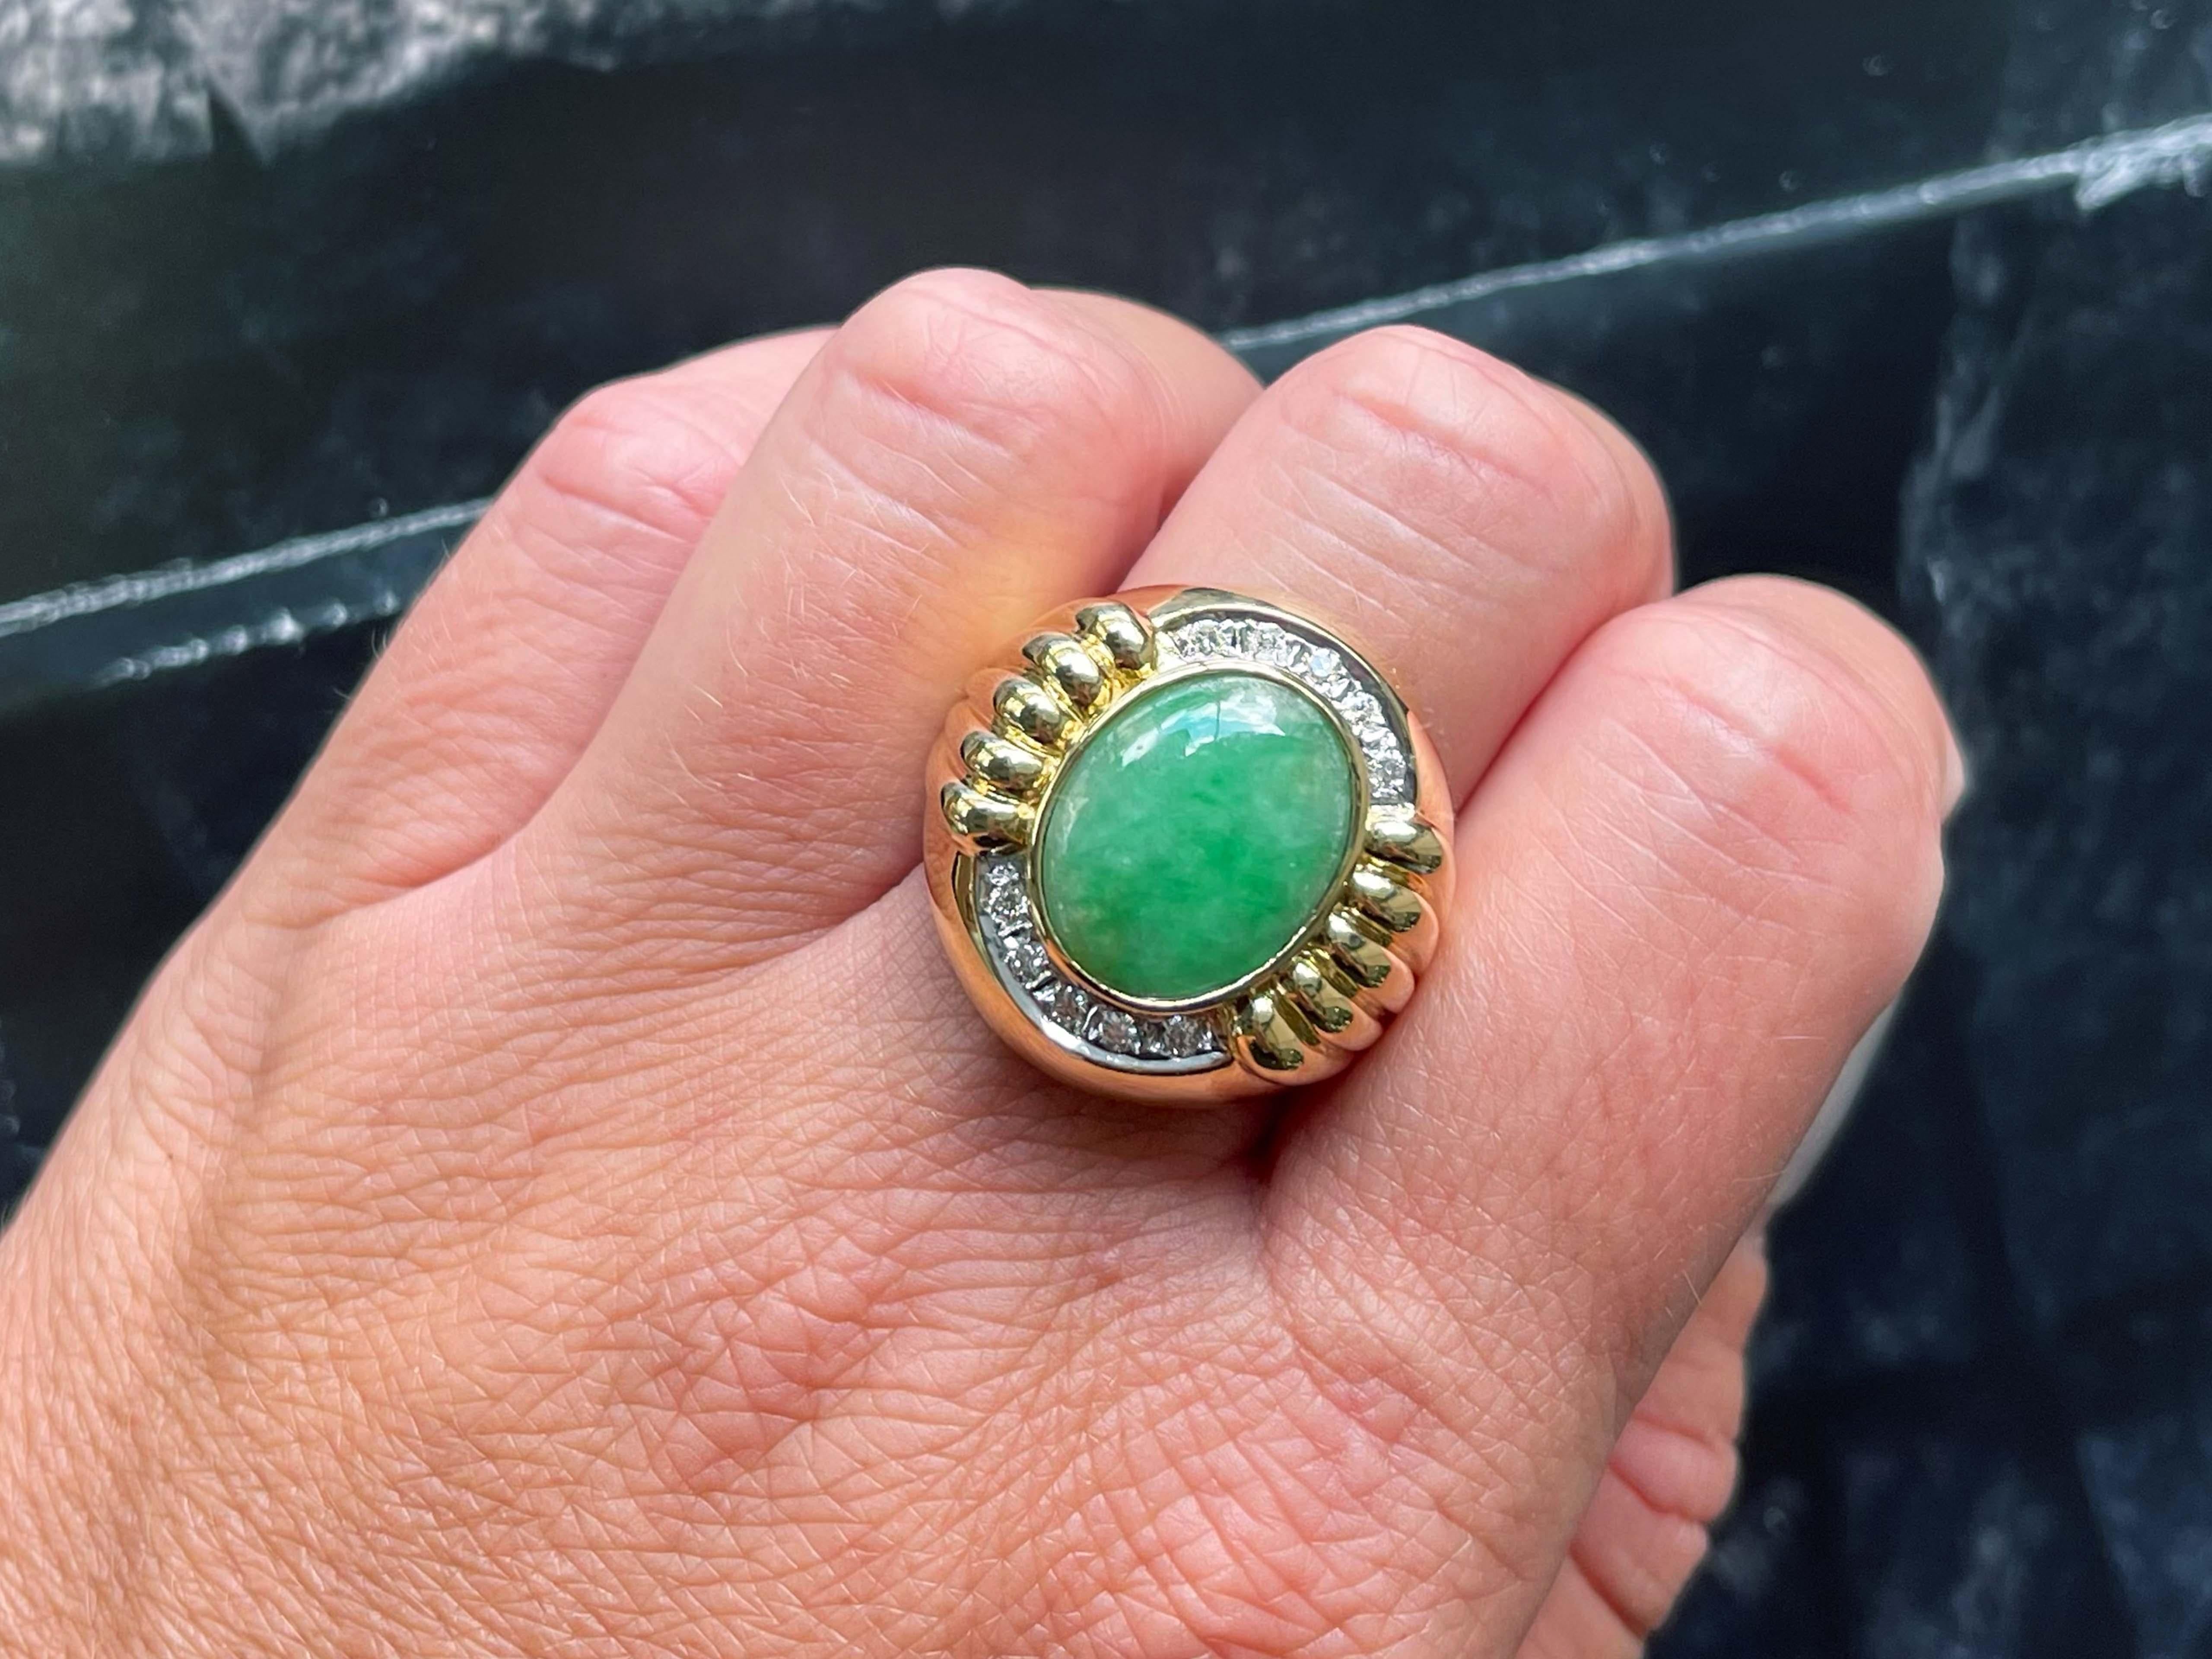 Item Specifications:

Metal: 18K Yellow Gold 

Style: Statement Ring

Ring Size: 9 (resizing available for a fee)

Total Weight: 19 Grams

Gemstone Specifications:

Center Gemstone: Jadeite Jade

Shape: Oval

Color: Mottled Green

Cut: Cabochon